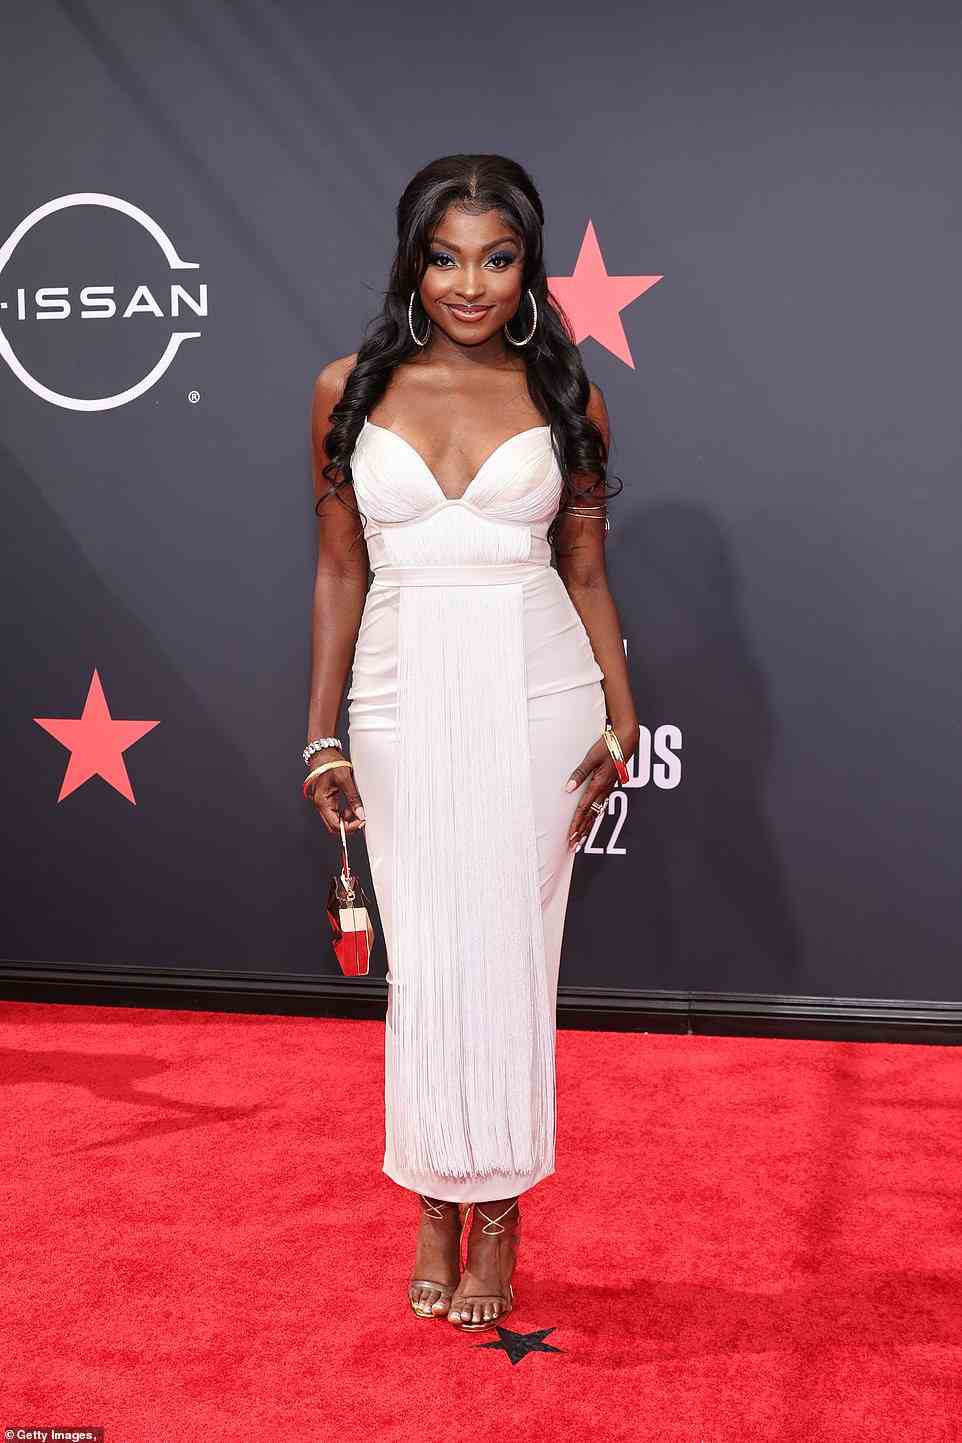 Ethereal: Loren Lott looked ethereal in a white form-fitting dress with a fringe